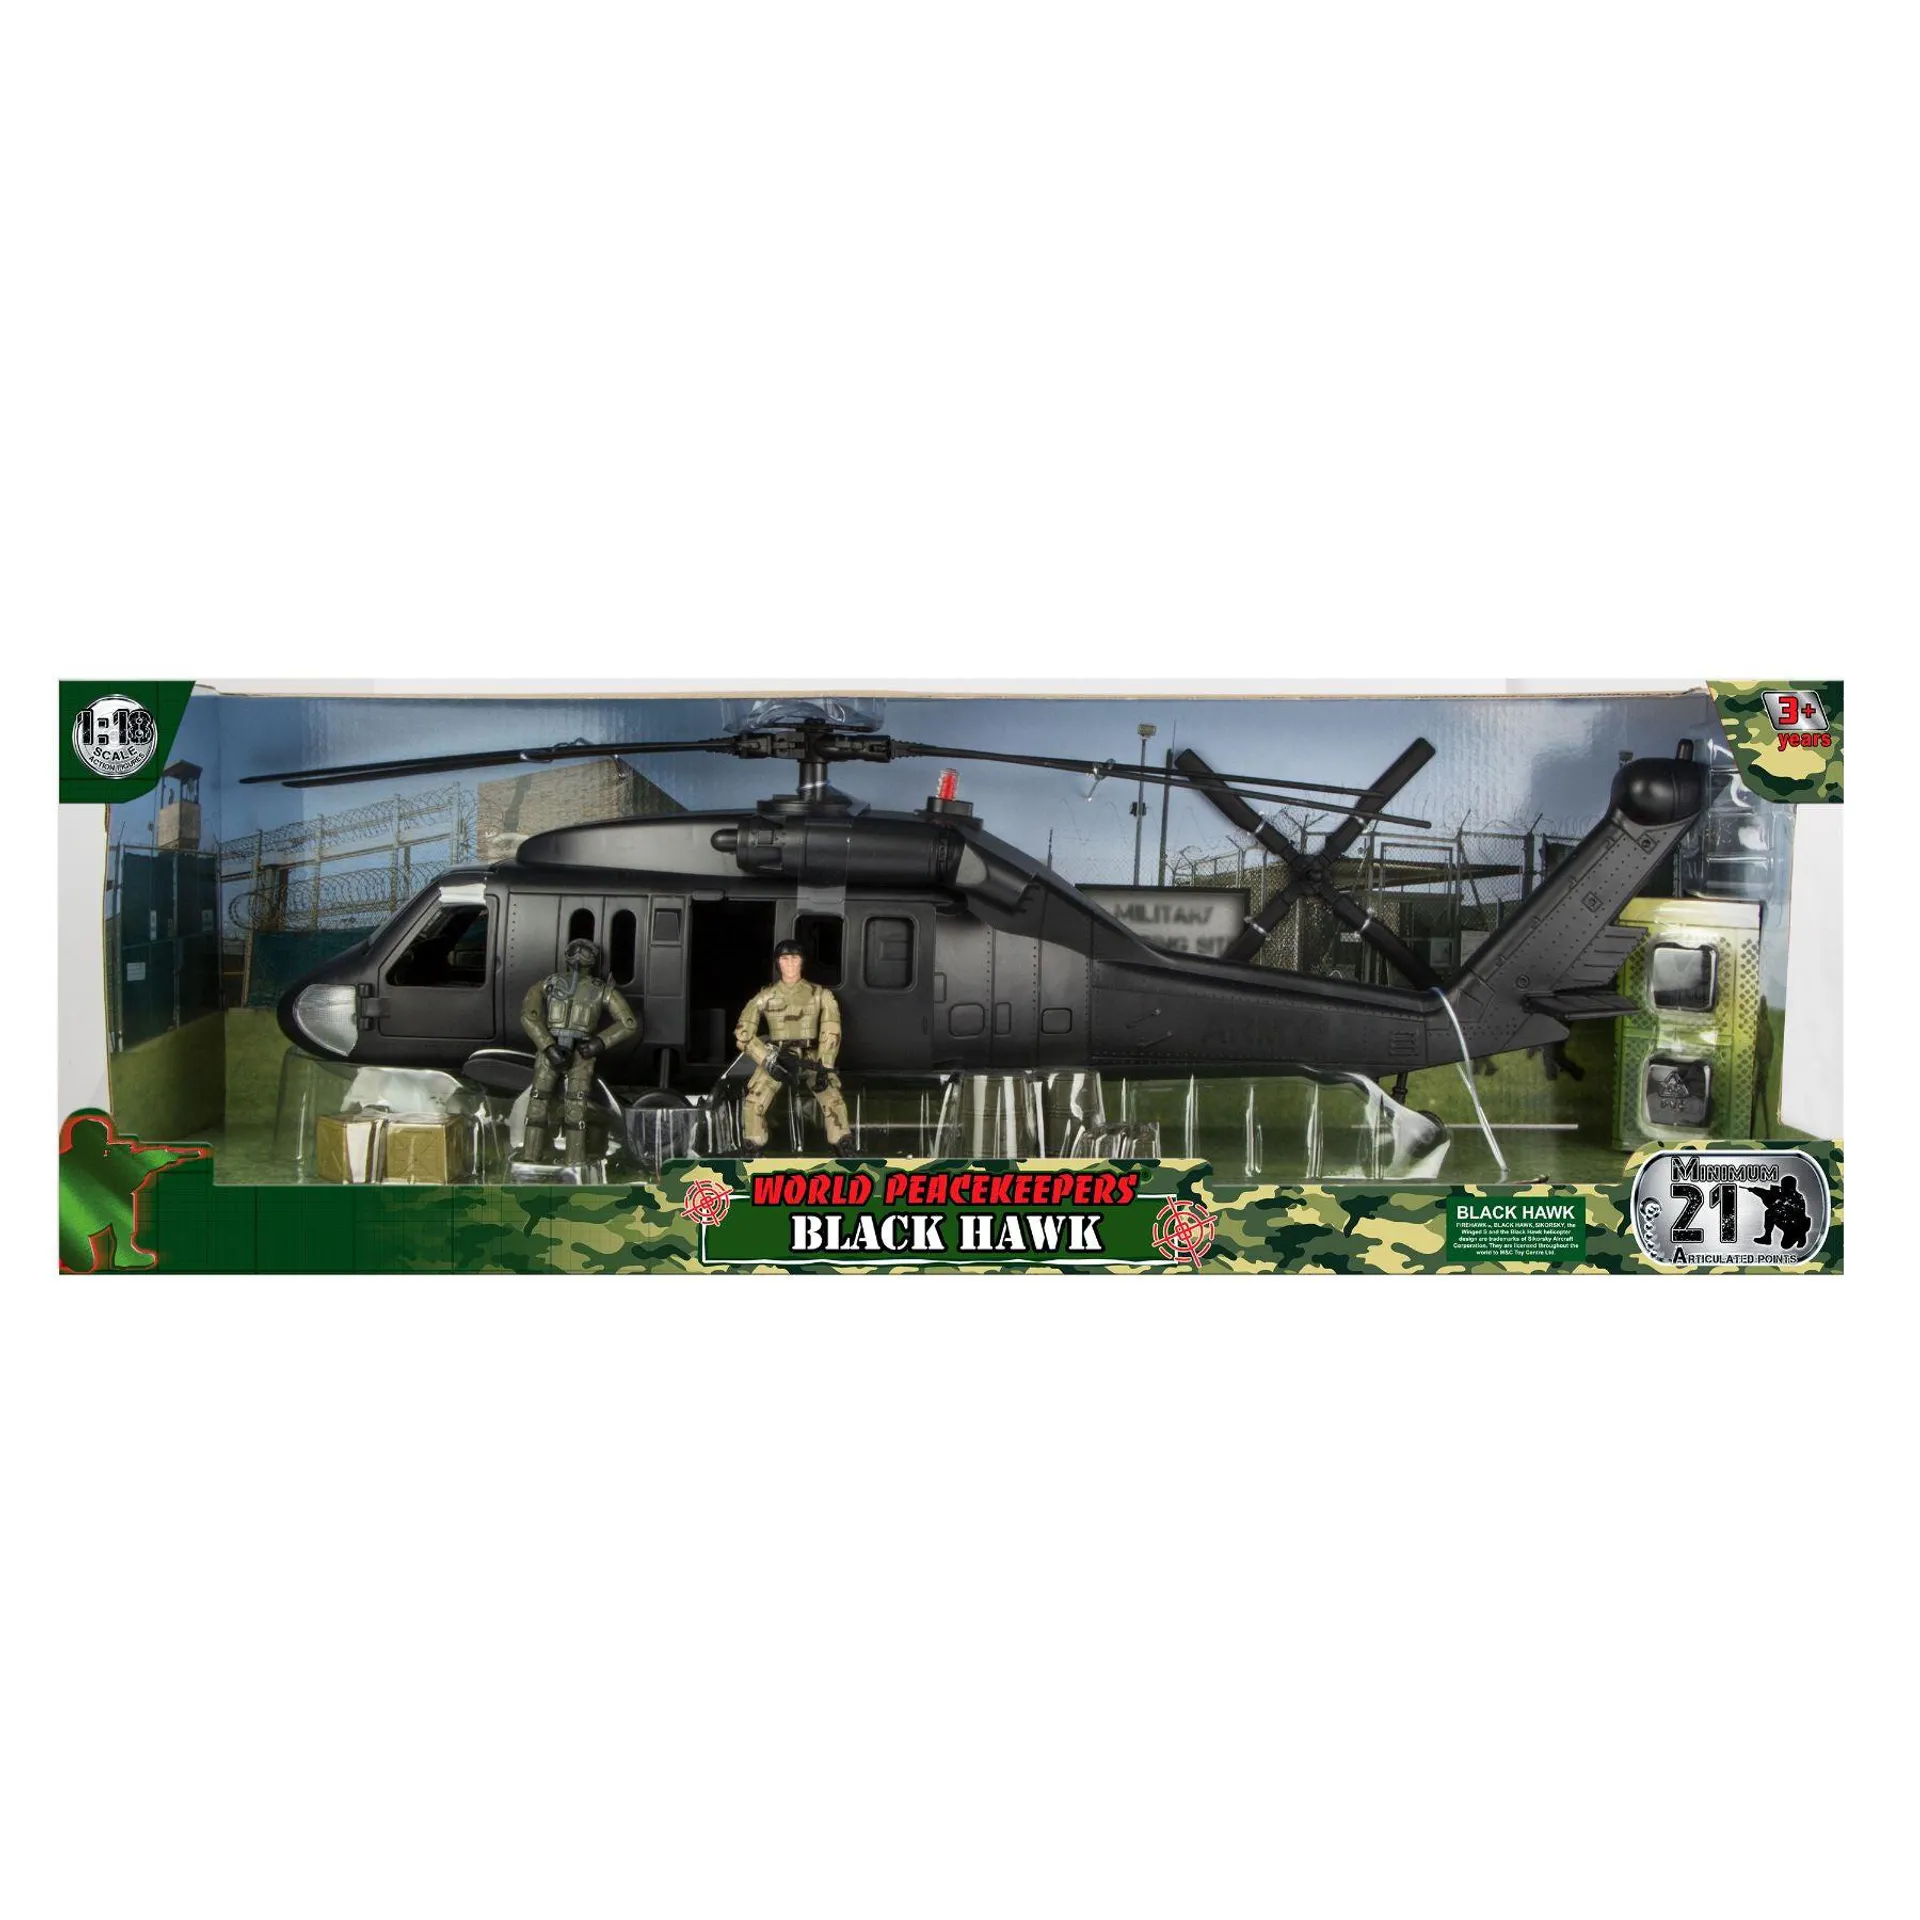 WORLD PEACEKEEPERS 1:18 BLACK HAWK HELICOPTER